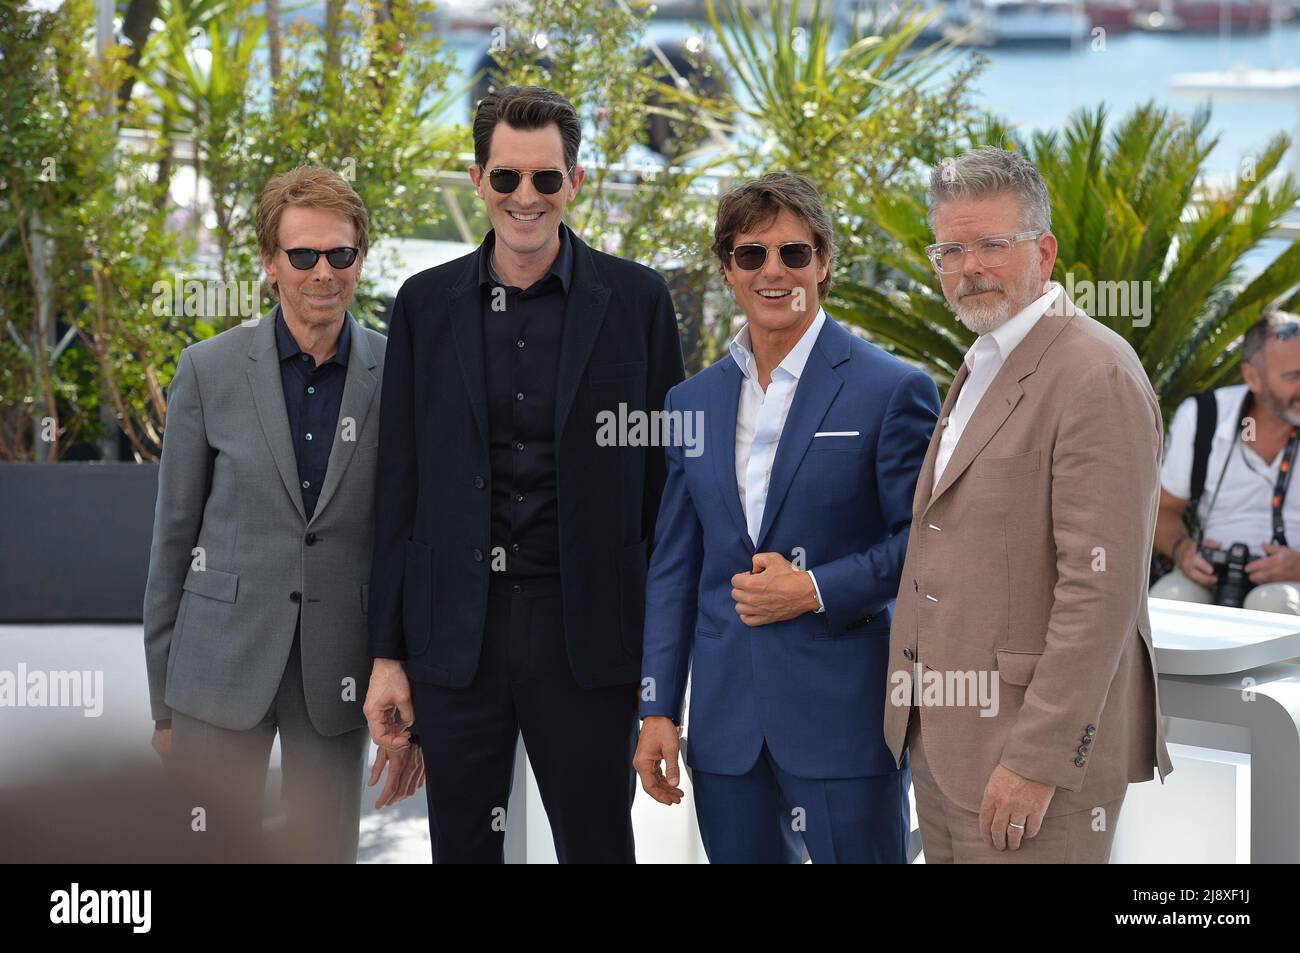 Cannes, France. 18th May, 2022. Jerry Bruckheimer (l-r), Tom Cruise, Joseph Kosinski and Christopher McQuarrie attend the photocall of 'Top Gun: Maverick' during the 75th Annual Cannes Film Festival at Palais des Festivals. Credit: Stefanie Rex/dpa/Alamy Live News Stock Photo